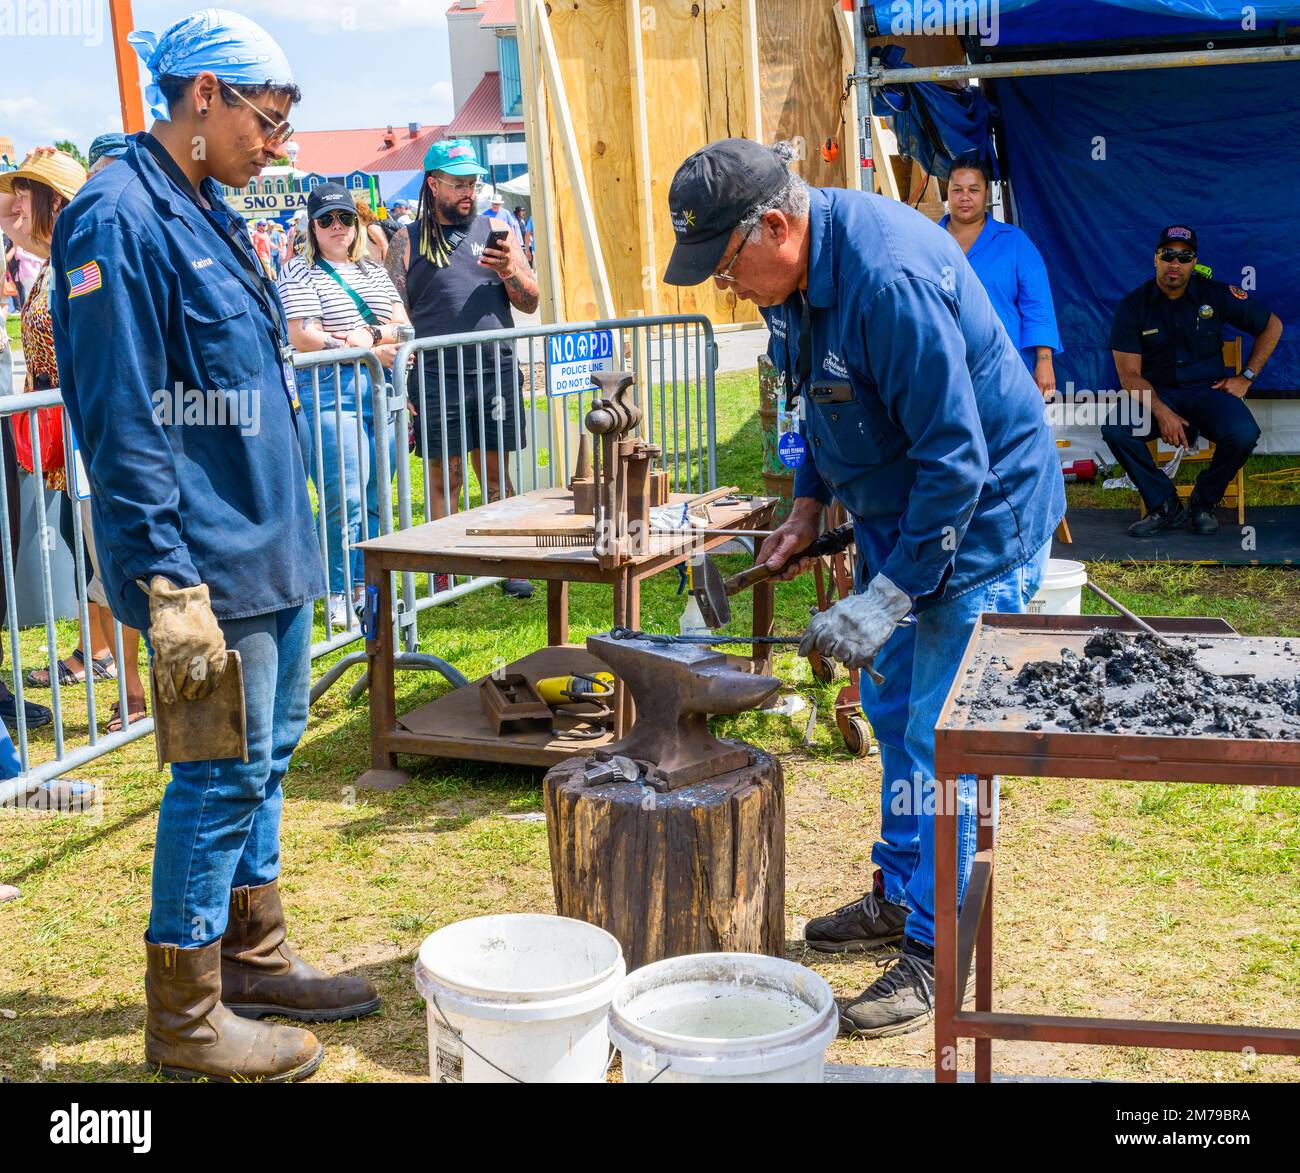 NEW ORLEANS, LA, USA - APRIL 29, 2022: Blacksmith and assistant demonstrating toolmaking craft at the New Orleans Jazz and Heritage Festival Stock Photo